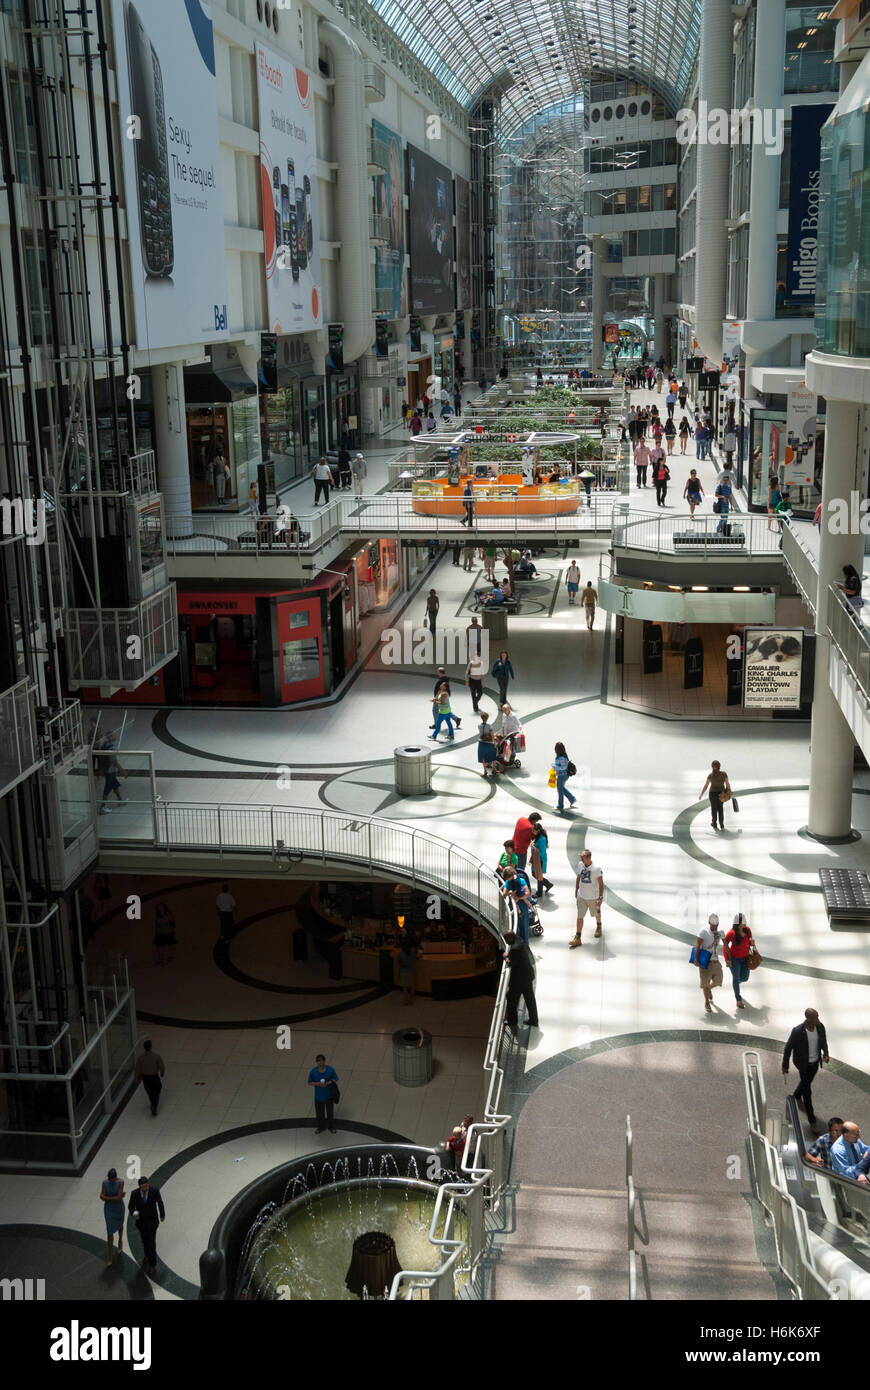 A view of the arcade of the Toronto Eaton Centre, the largest shopping mall in Ontario and tourist attraction in Toronto Canada. Stock Photo